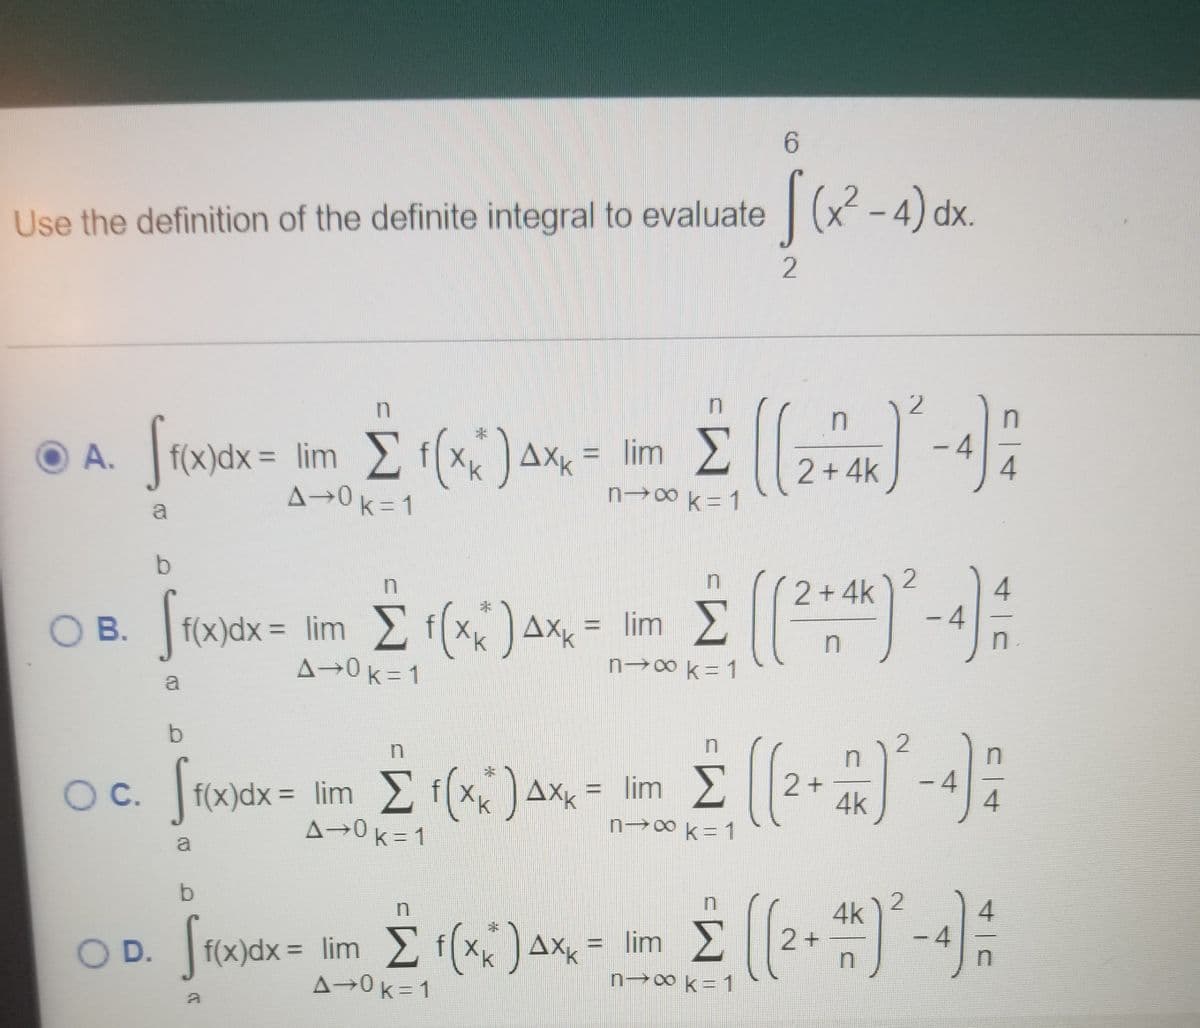 Use the definition of the definite integral to evaluate | (x-4) dx.
2
in
2
Stonik = im E ()a = im E -4:
f(x)dx = lim fx
A→0k=1
O A.
AXK
= lim
%3D
2 + 4k
n-→0k=1
b.
2 +4k
f(x)dx= lim
A→0k=1
= lim E f(x)Ax =
OB.
= lim
%3D
n→0 k = 1
a
Oc. Jrodx = lim E f(x;) ax, = lim E2+
- 4
f(x)dx = lim f(x,)
A→0k= 1
Oc.
4k
n→8k=1
a
b.
4k
2+
n
-4
O D. f(x)dx= lim f(x)AXk
A→0k=1
OD.
= lim >
%3D
n 0 k= 1
